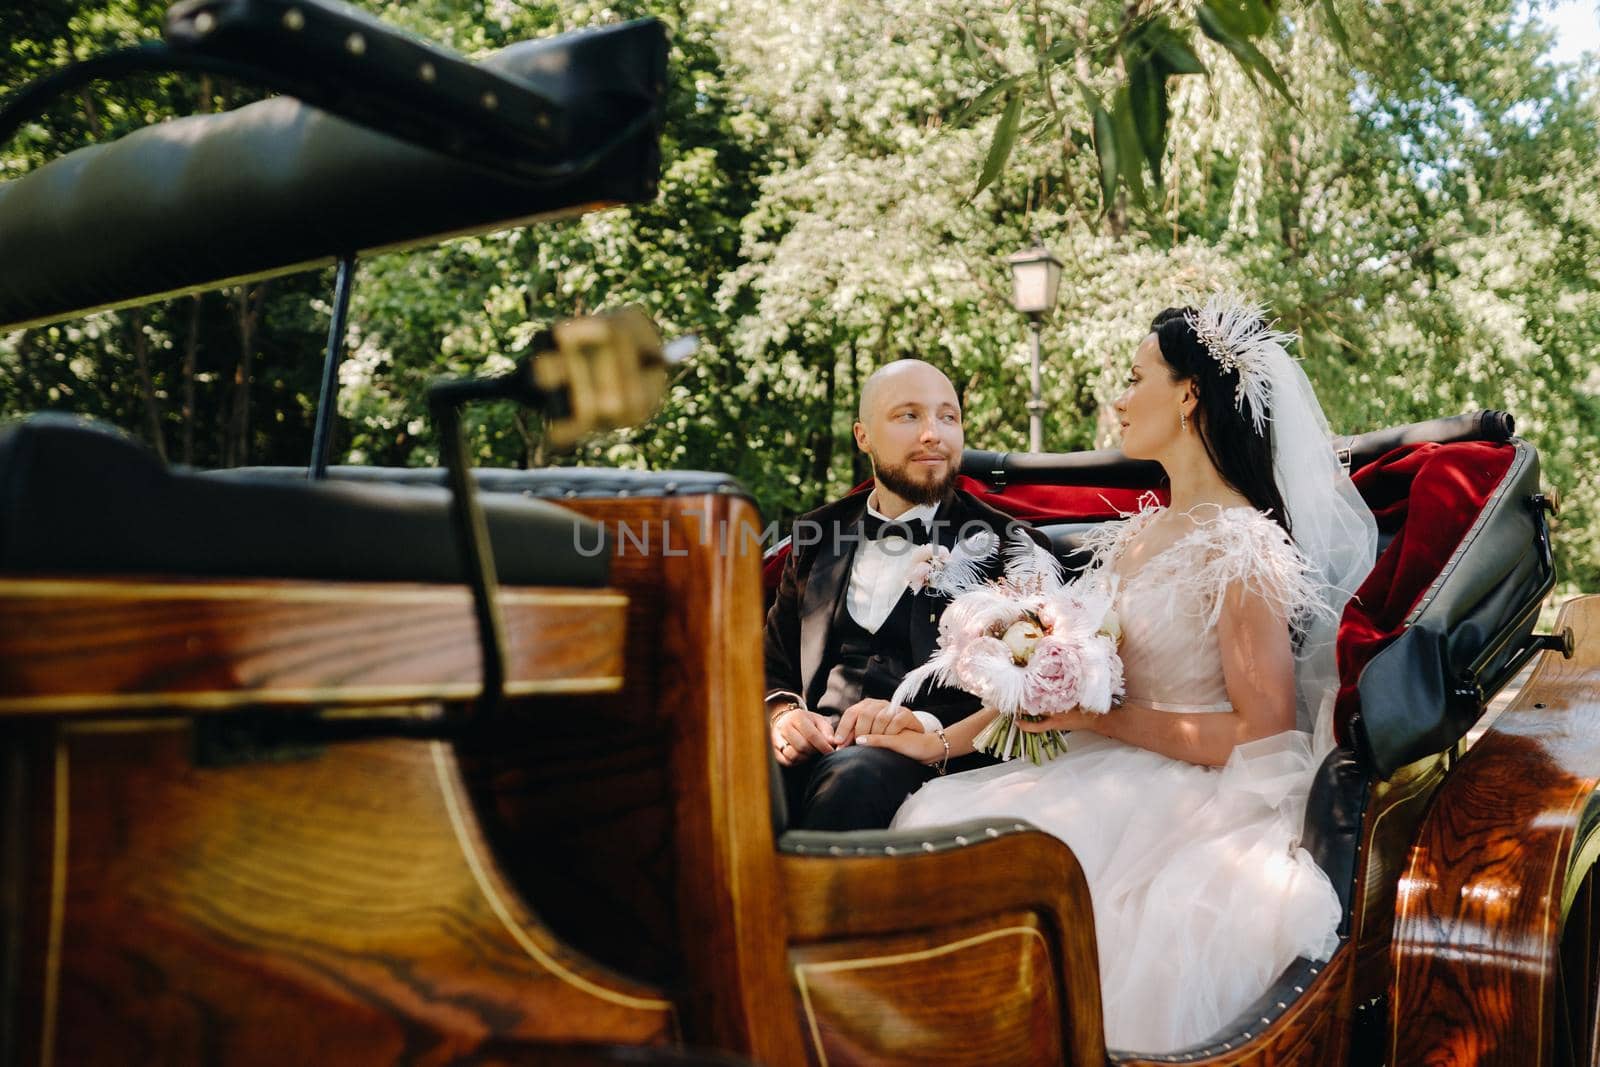 The bride and groom with a bouquet are sitting in a carriage in nature in retro style by Lobachad